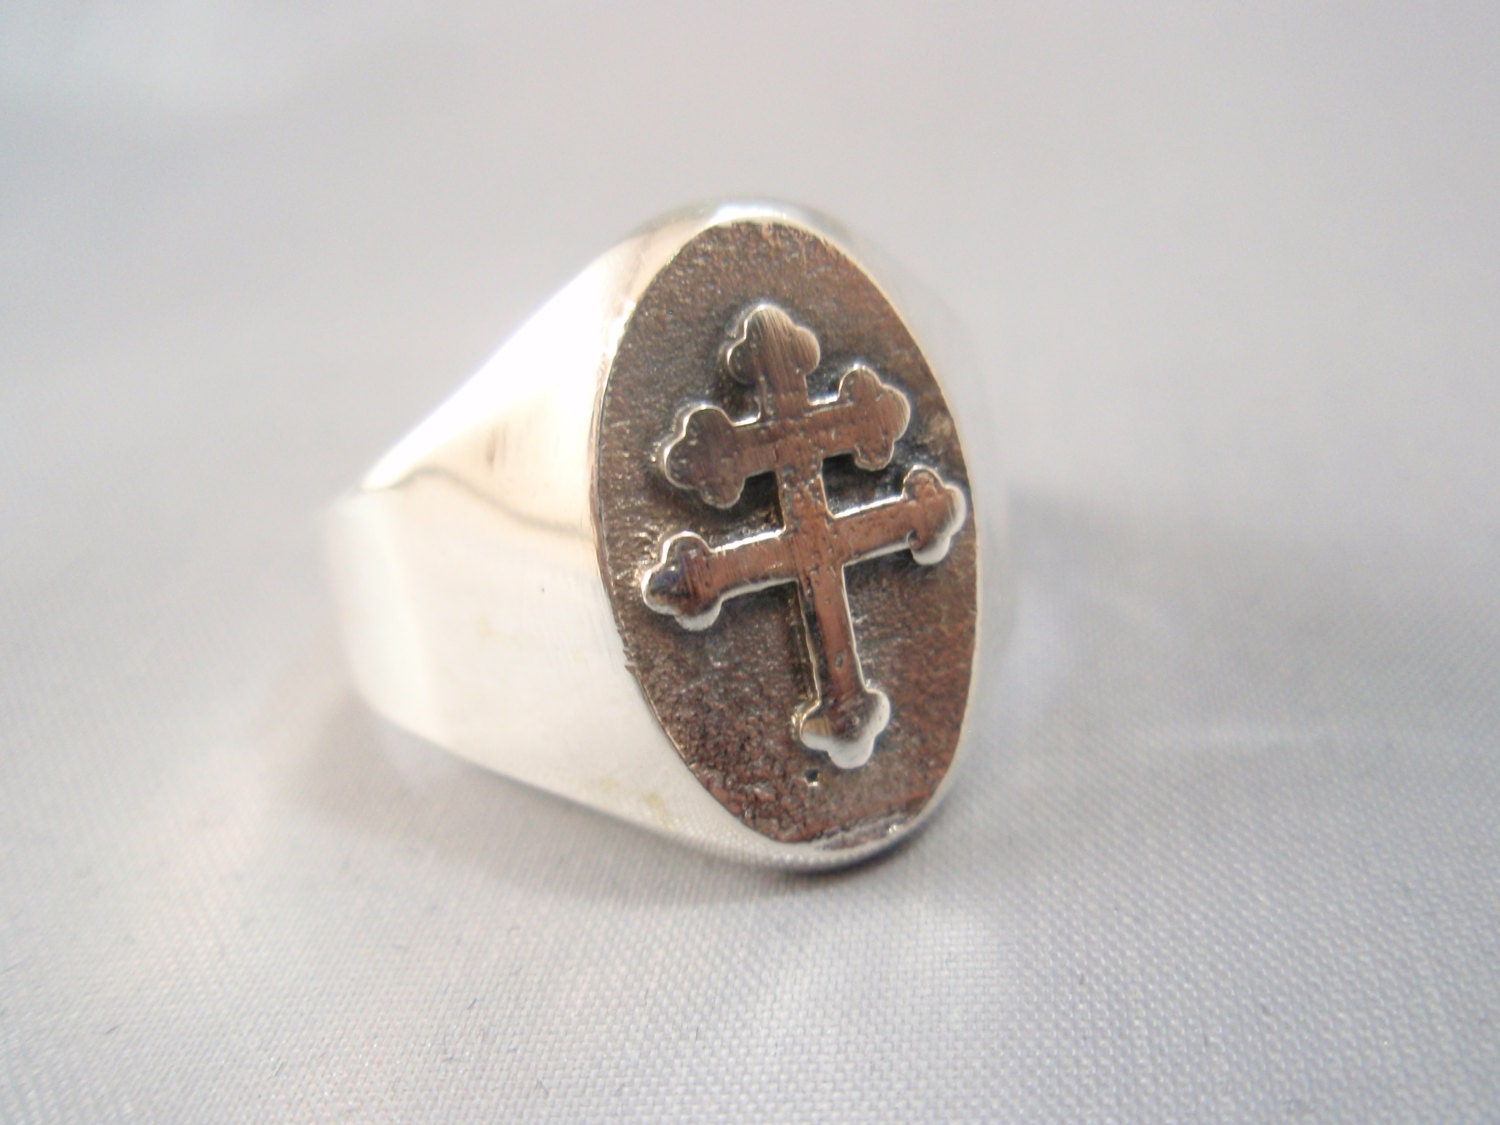 CROSS OF LORRAINE ring sterling silver 925 french foreign